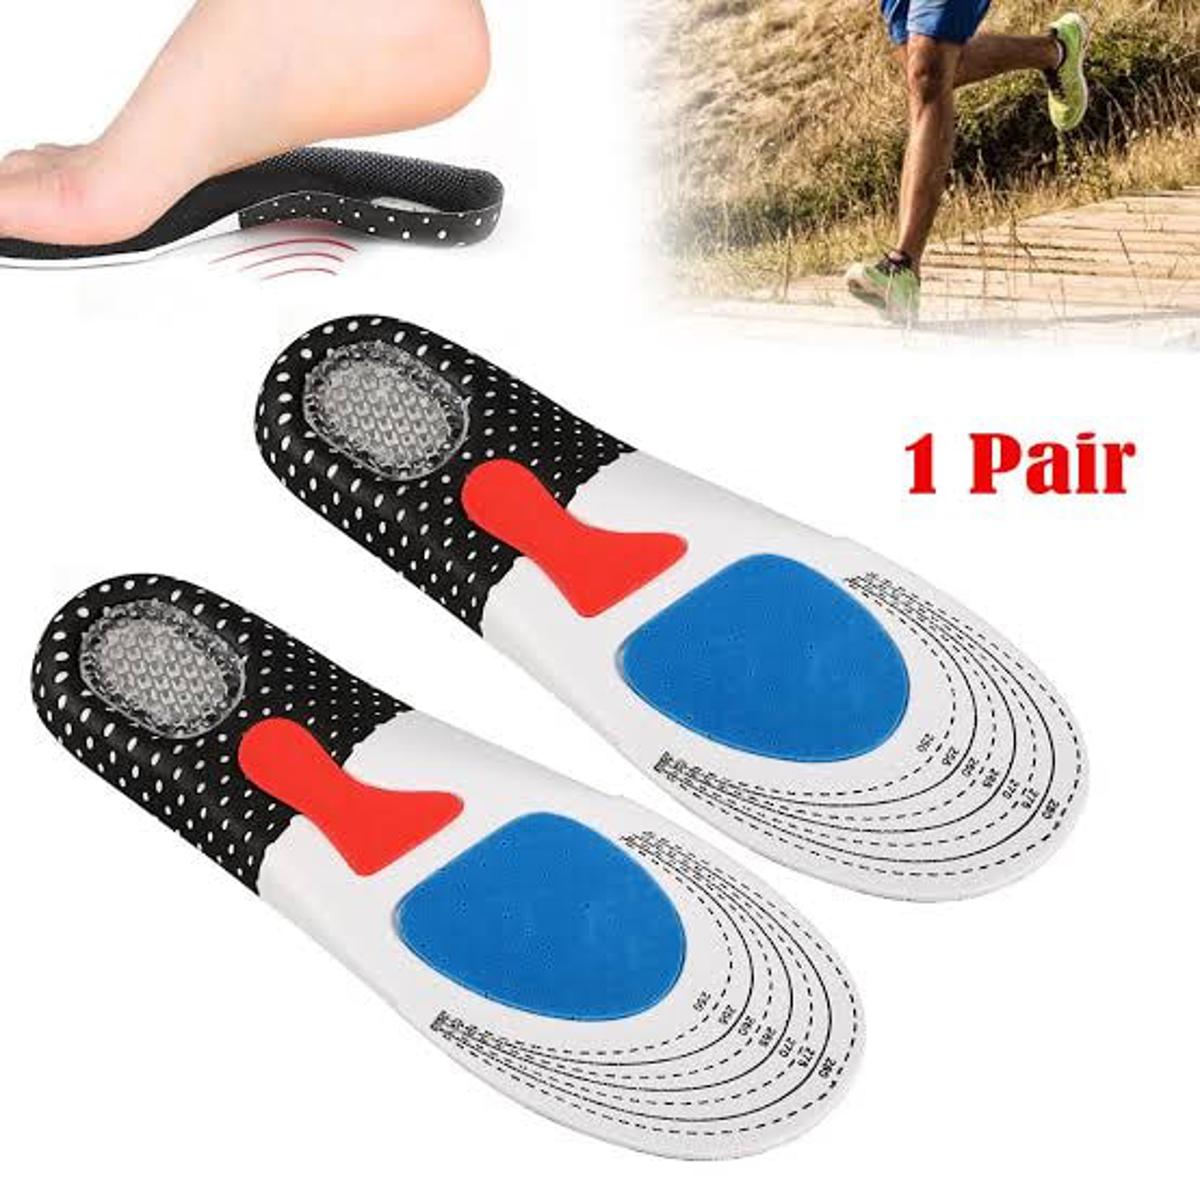 Unisex Orthotic Arch Support Sport Shoe Pad Sport Running Foot Care Pads